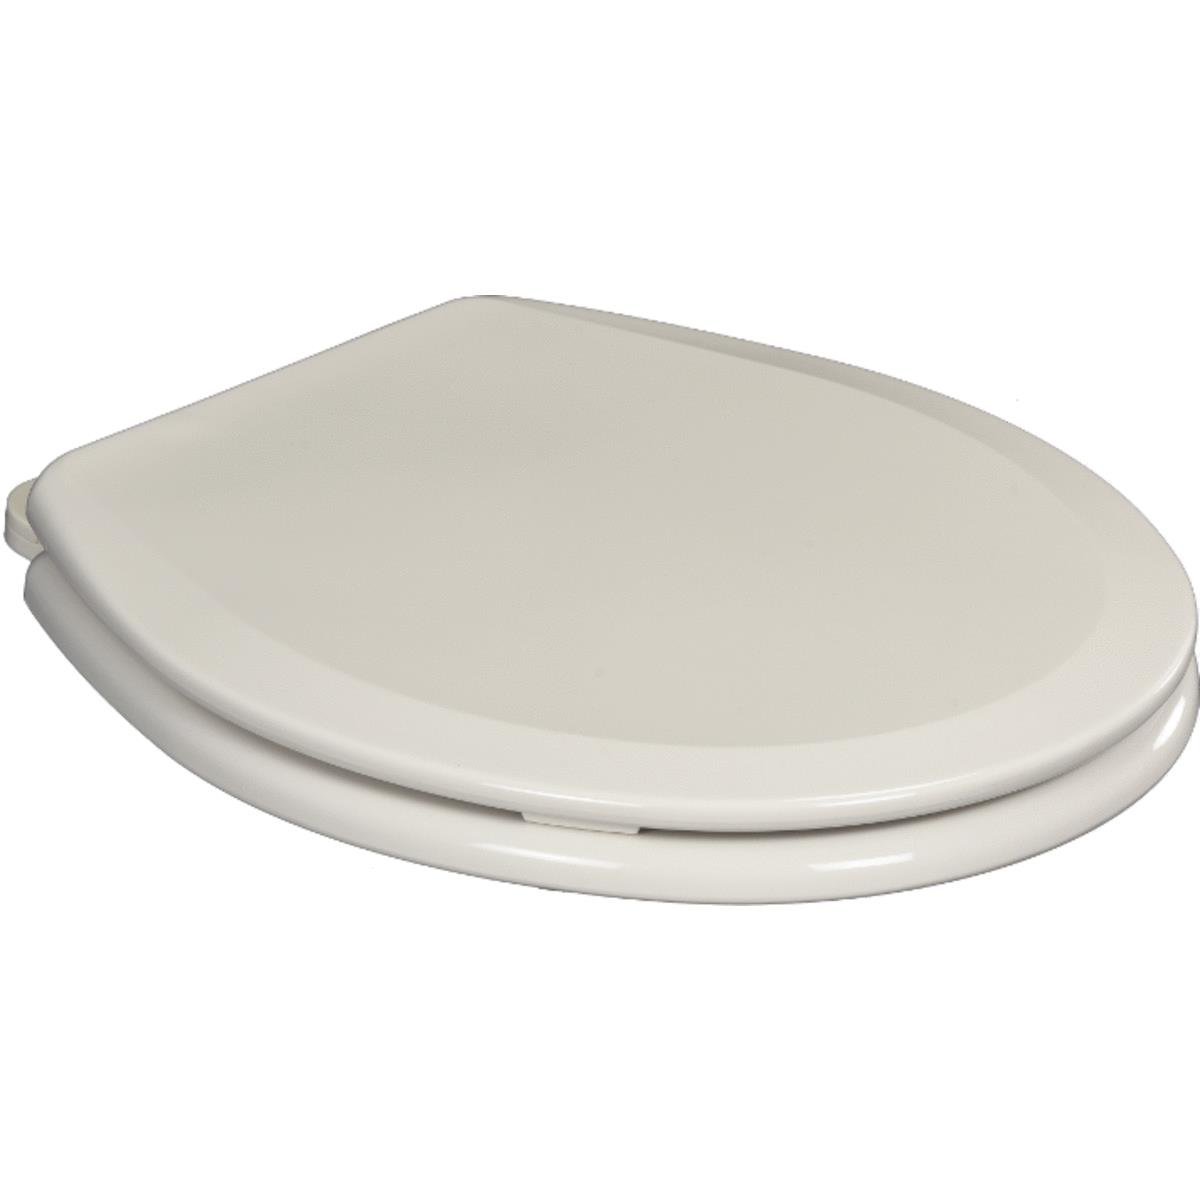 Mp900sc-001 Elong Wood With Safe Close White Mansfield Premium Toilet Seat